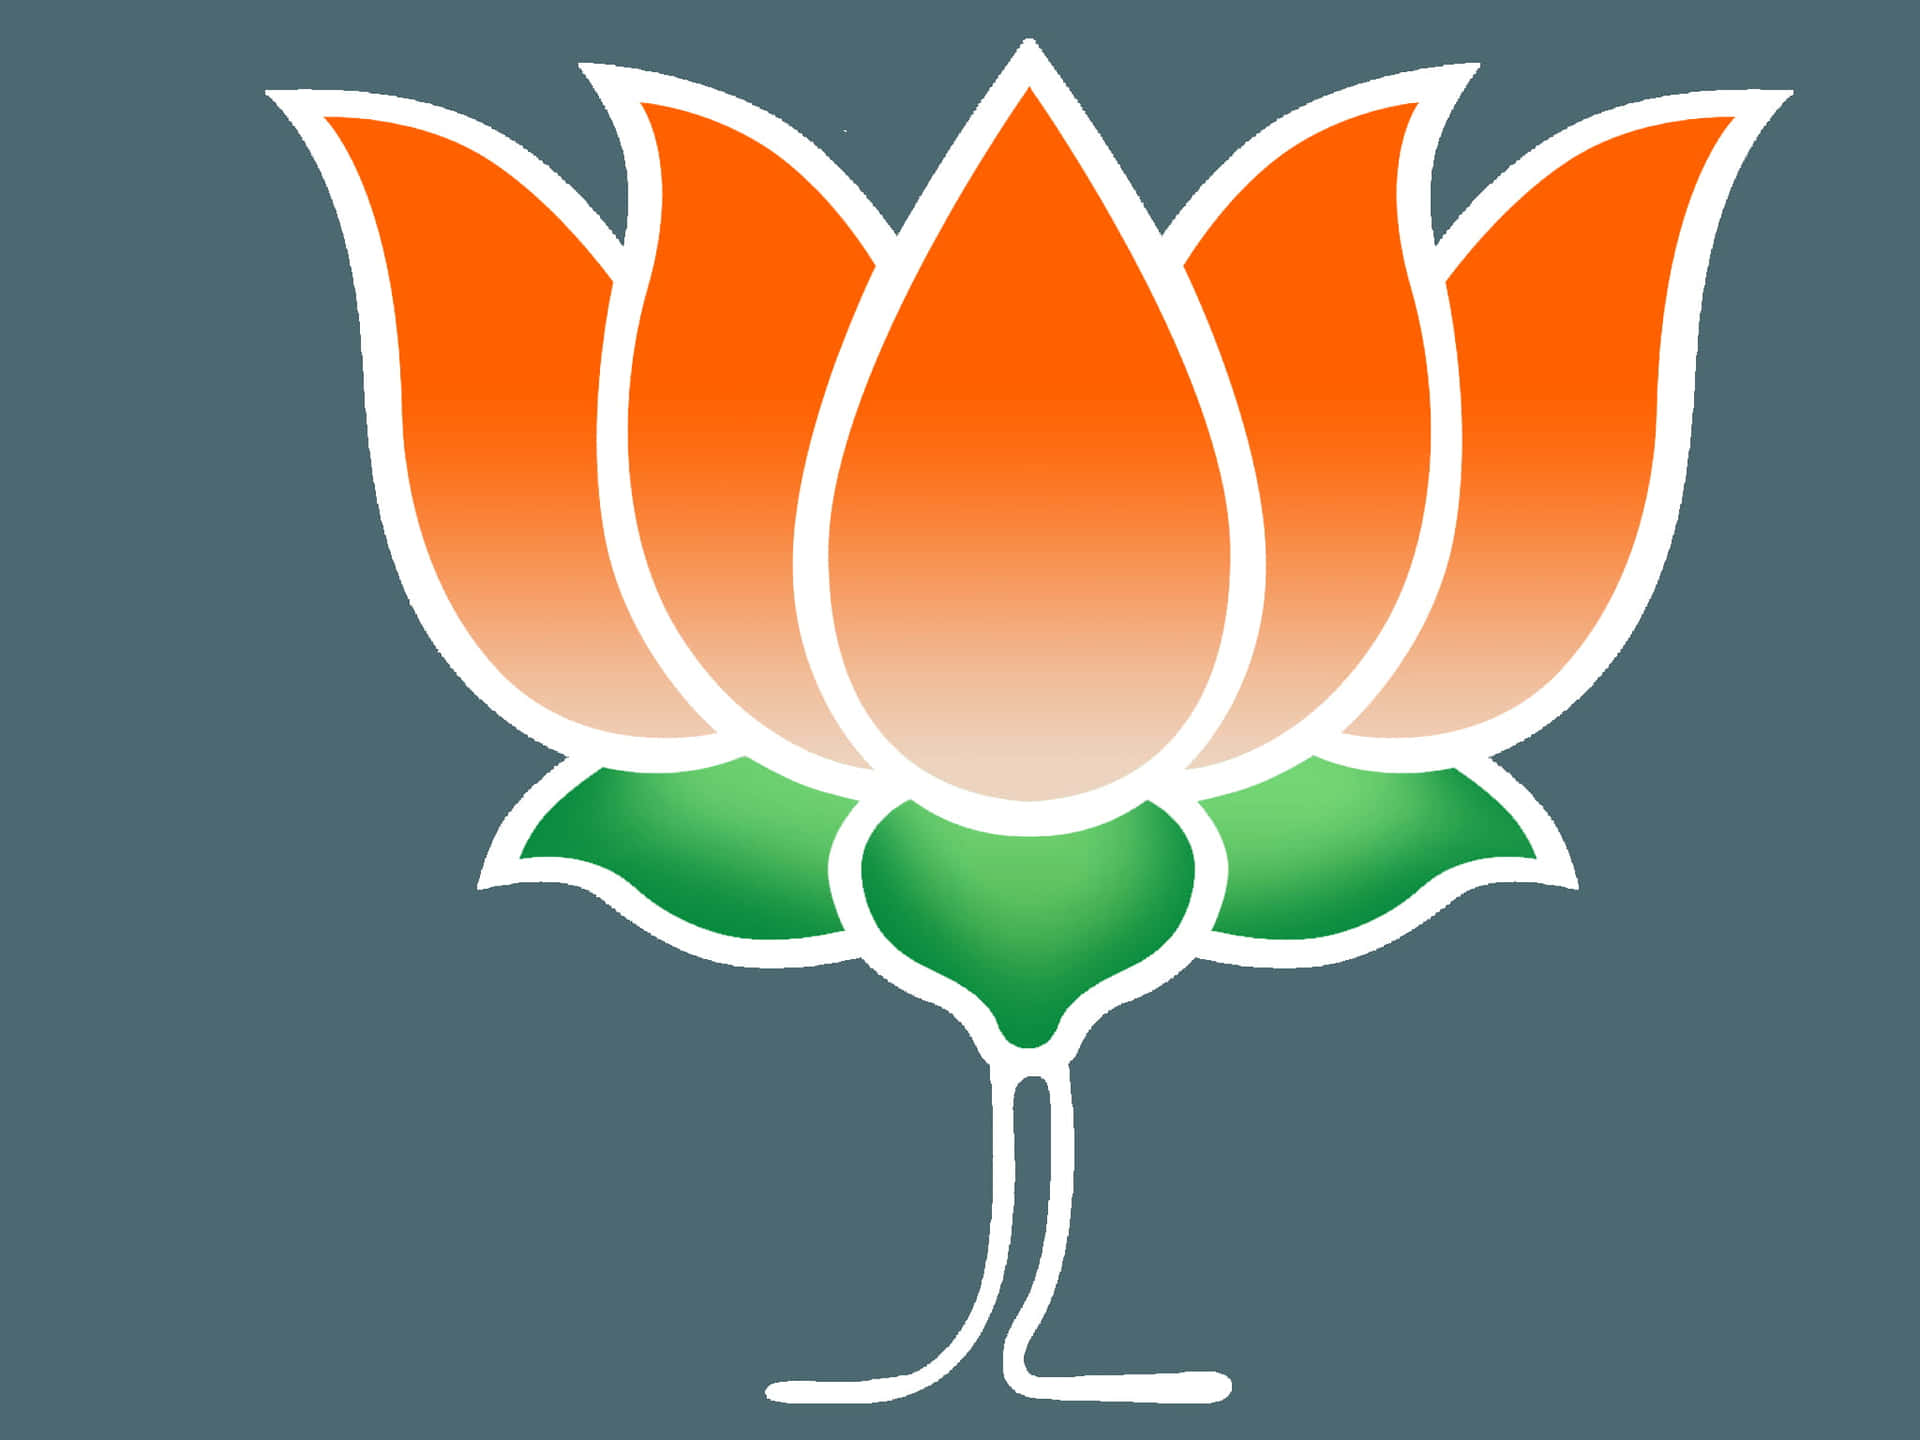 File:BJP election symbol.png - Wikipedia